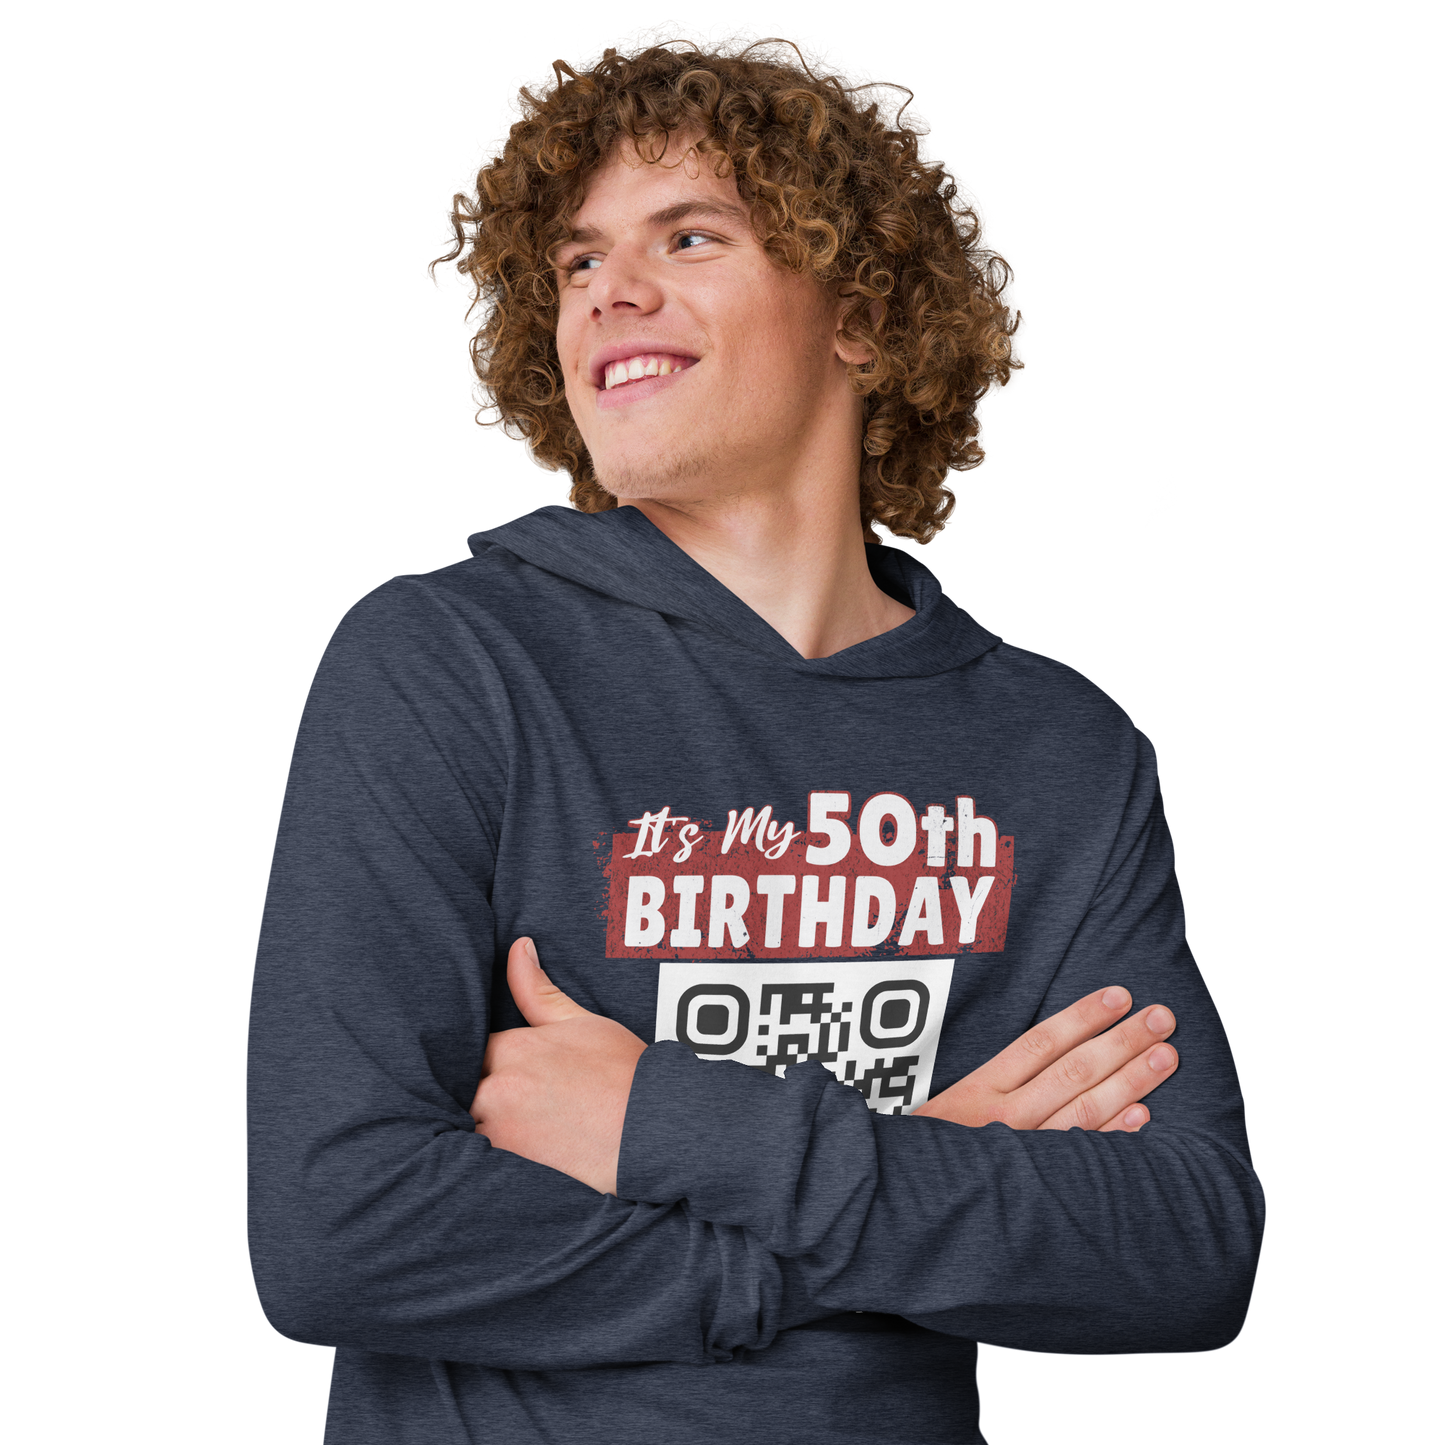 It's My 50th Birthday Buy Me A Drink Lightweight Hoodie - Personalizable